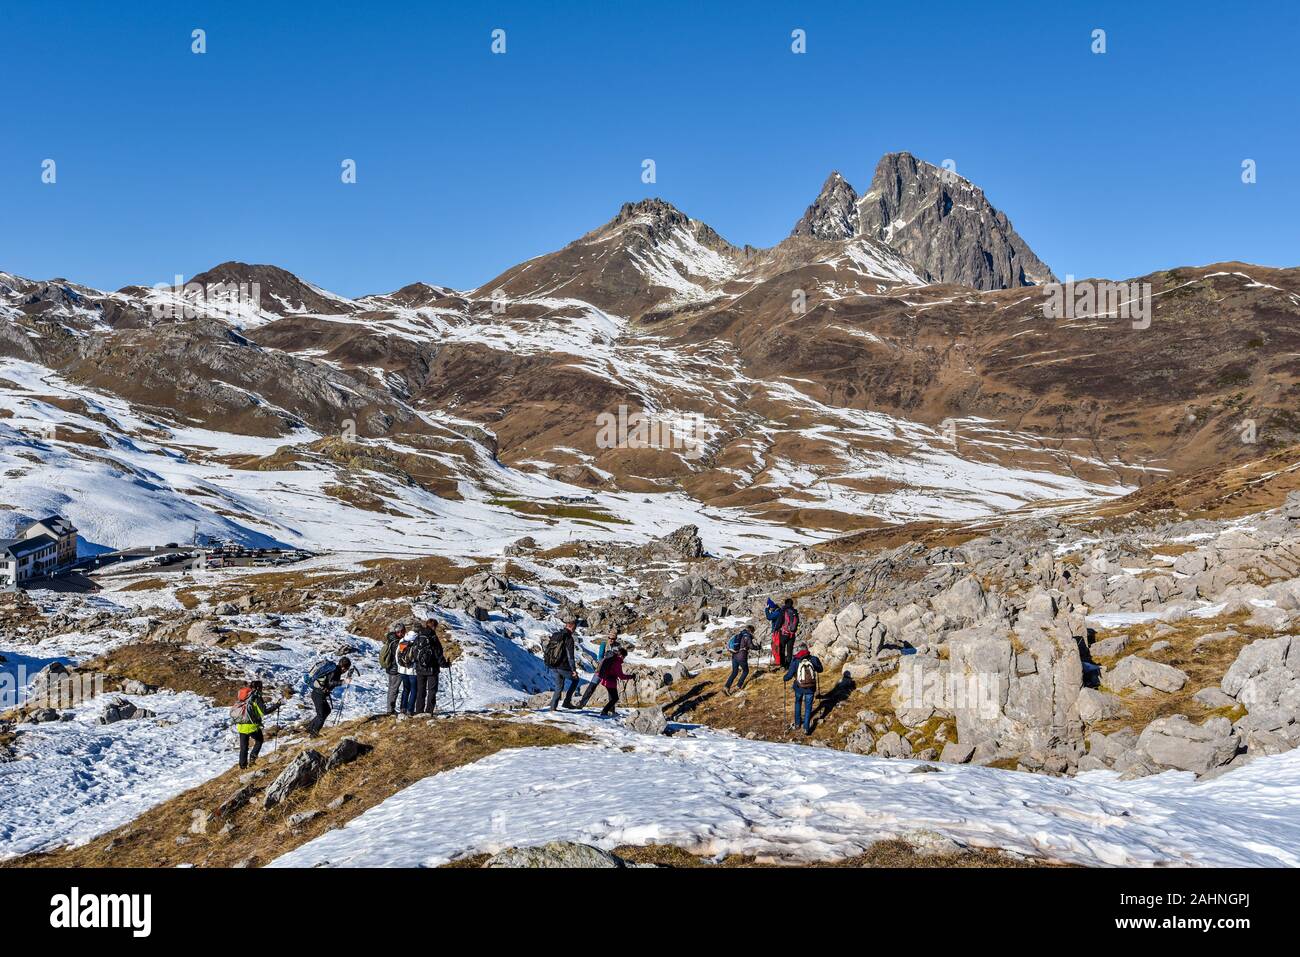 Portalet, France – January 1, 2019 People hikers moving along the mountain slope in French Atlantic Pyrenees. The early winter landscape of Portalet m Stock Photo